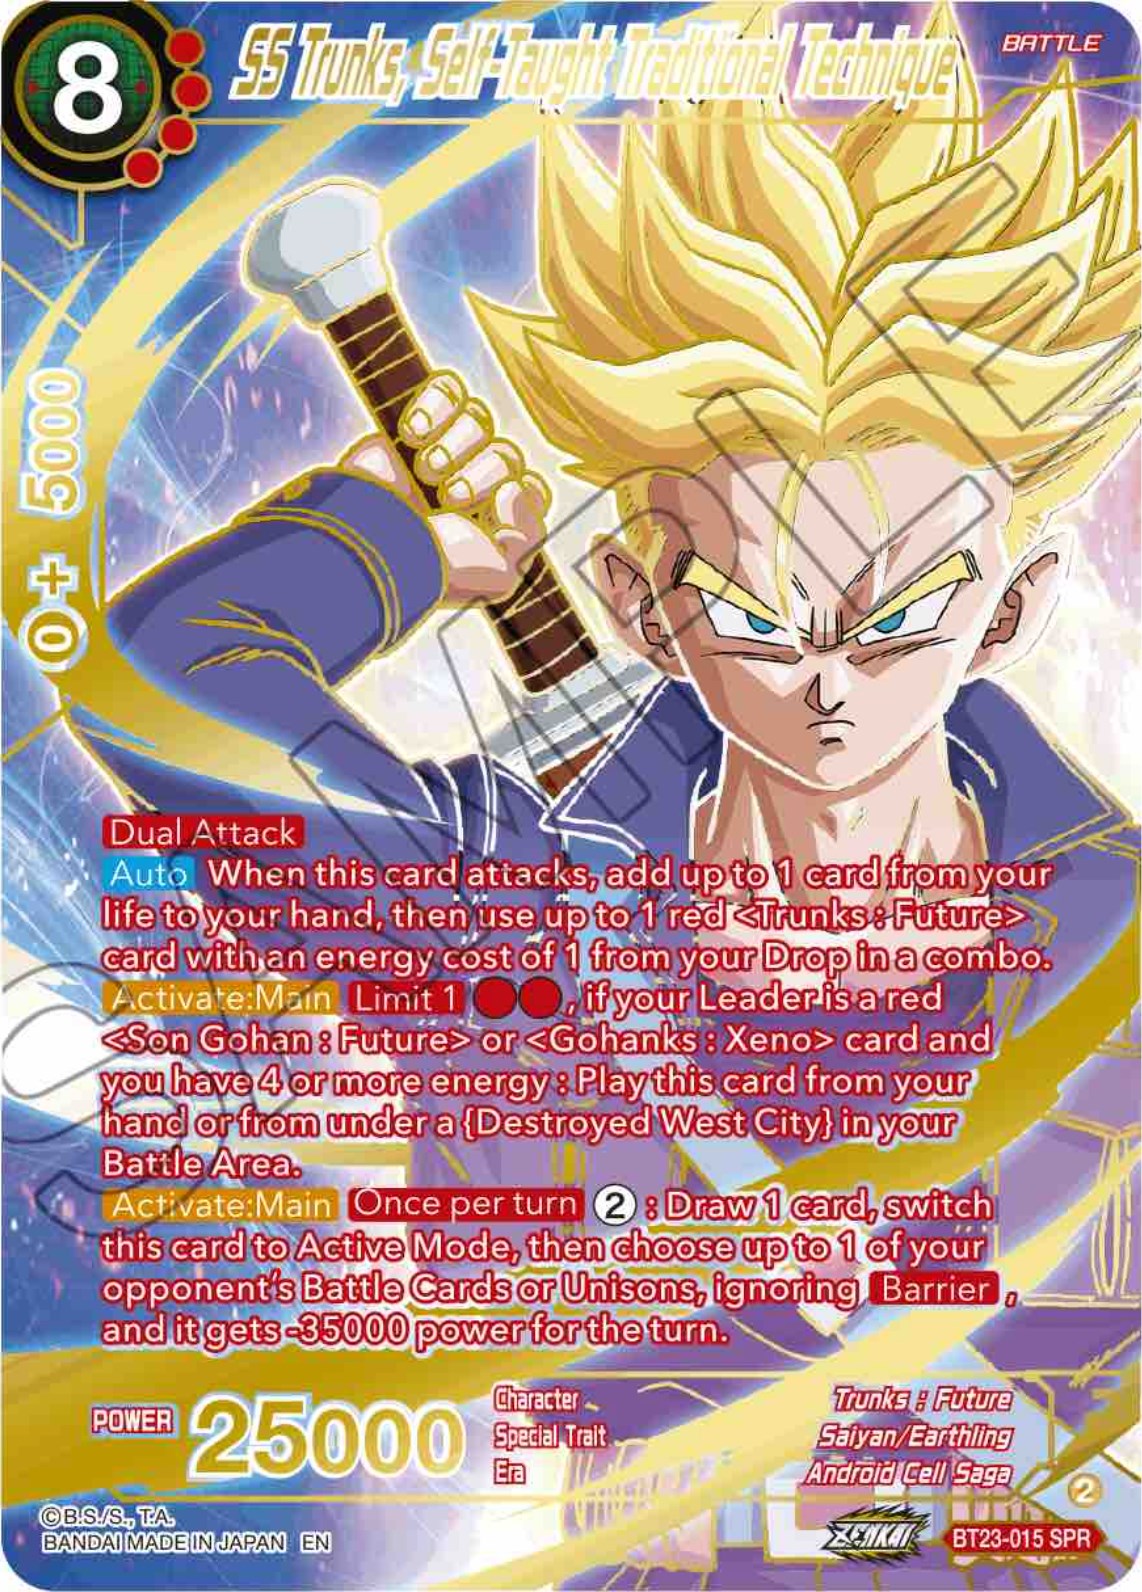 SS Trunks, Self-Taught Traditional Technique (SPR) (BT23-015) [Perfect Combination] | North Valley Games